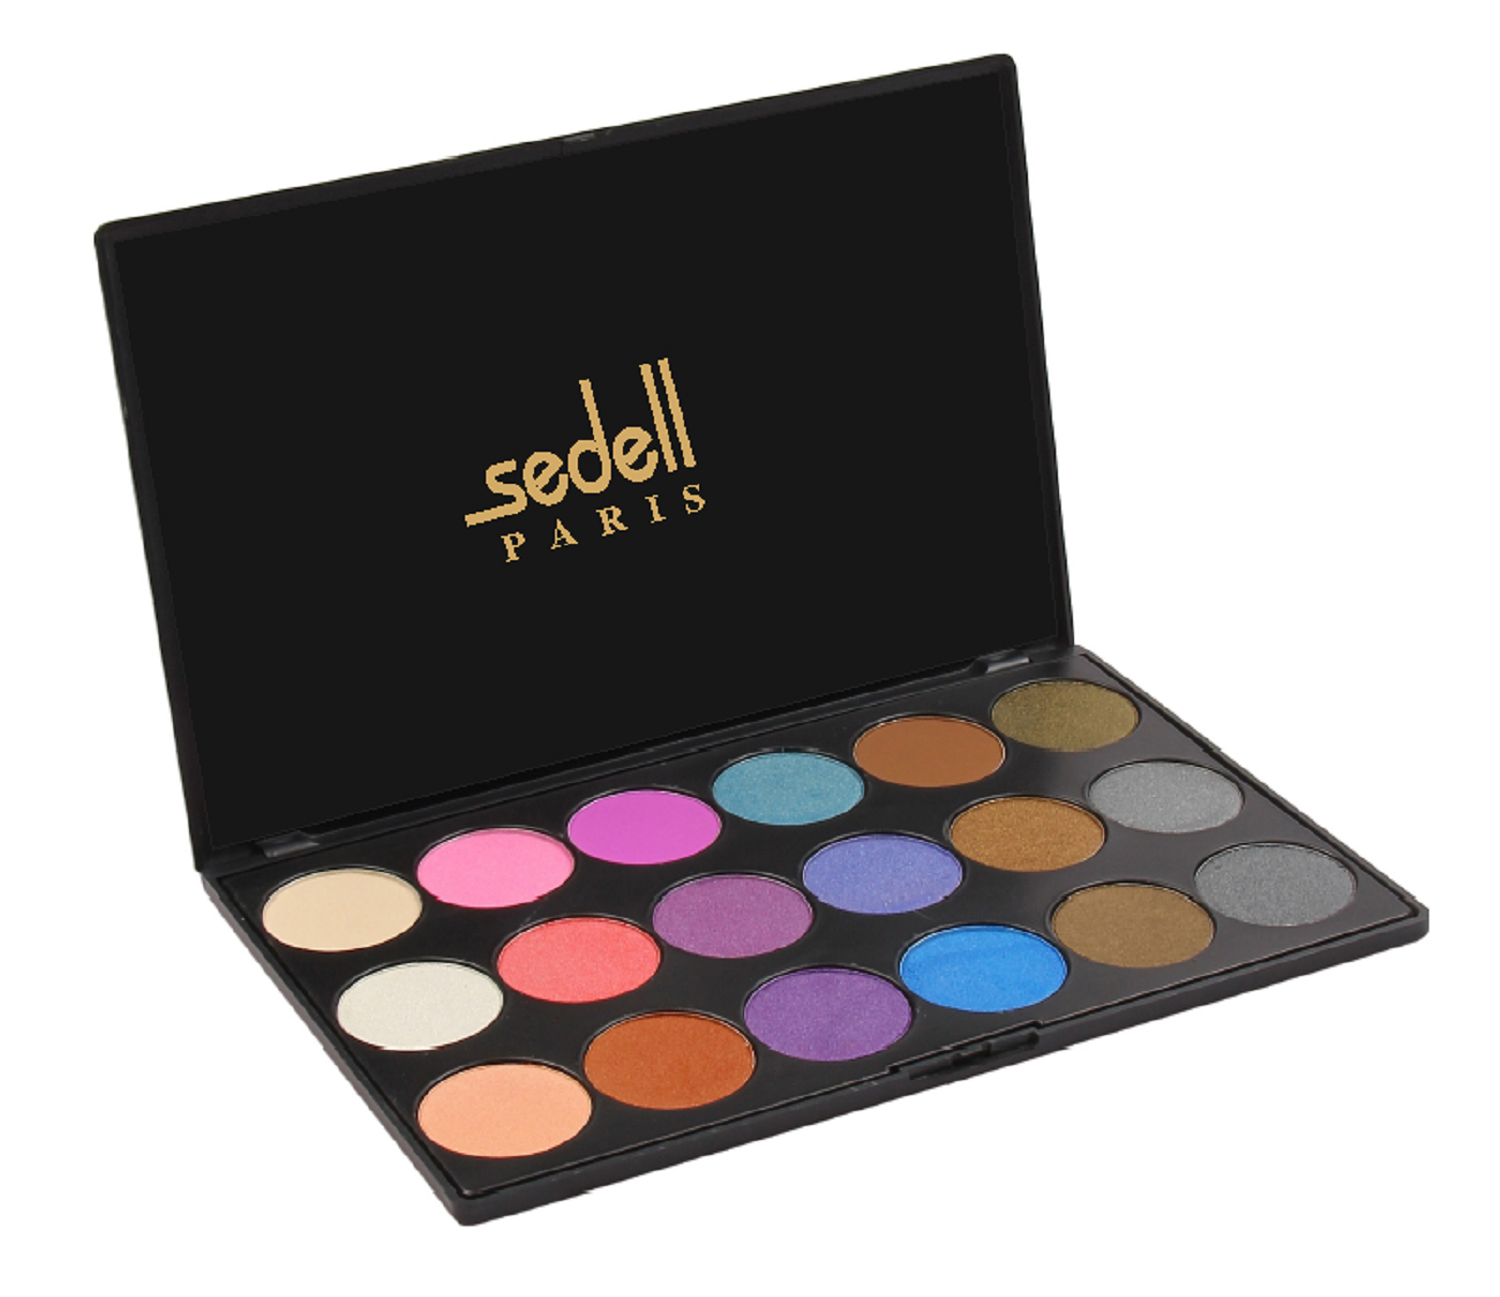 Sedell Professional Waterproof Eye Shadow Powder Make Up Palette Shimmers Mattes Contour Glow Kit Set of 18 Colors